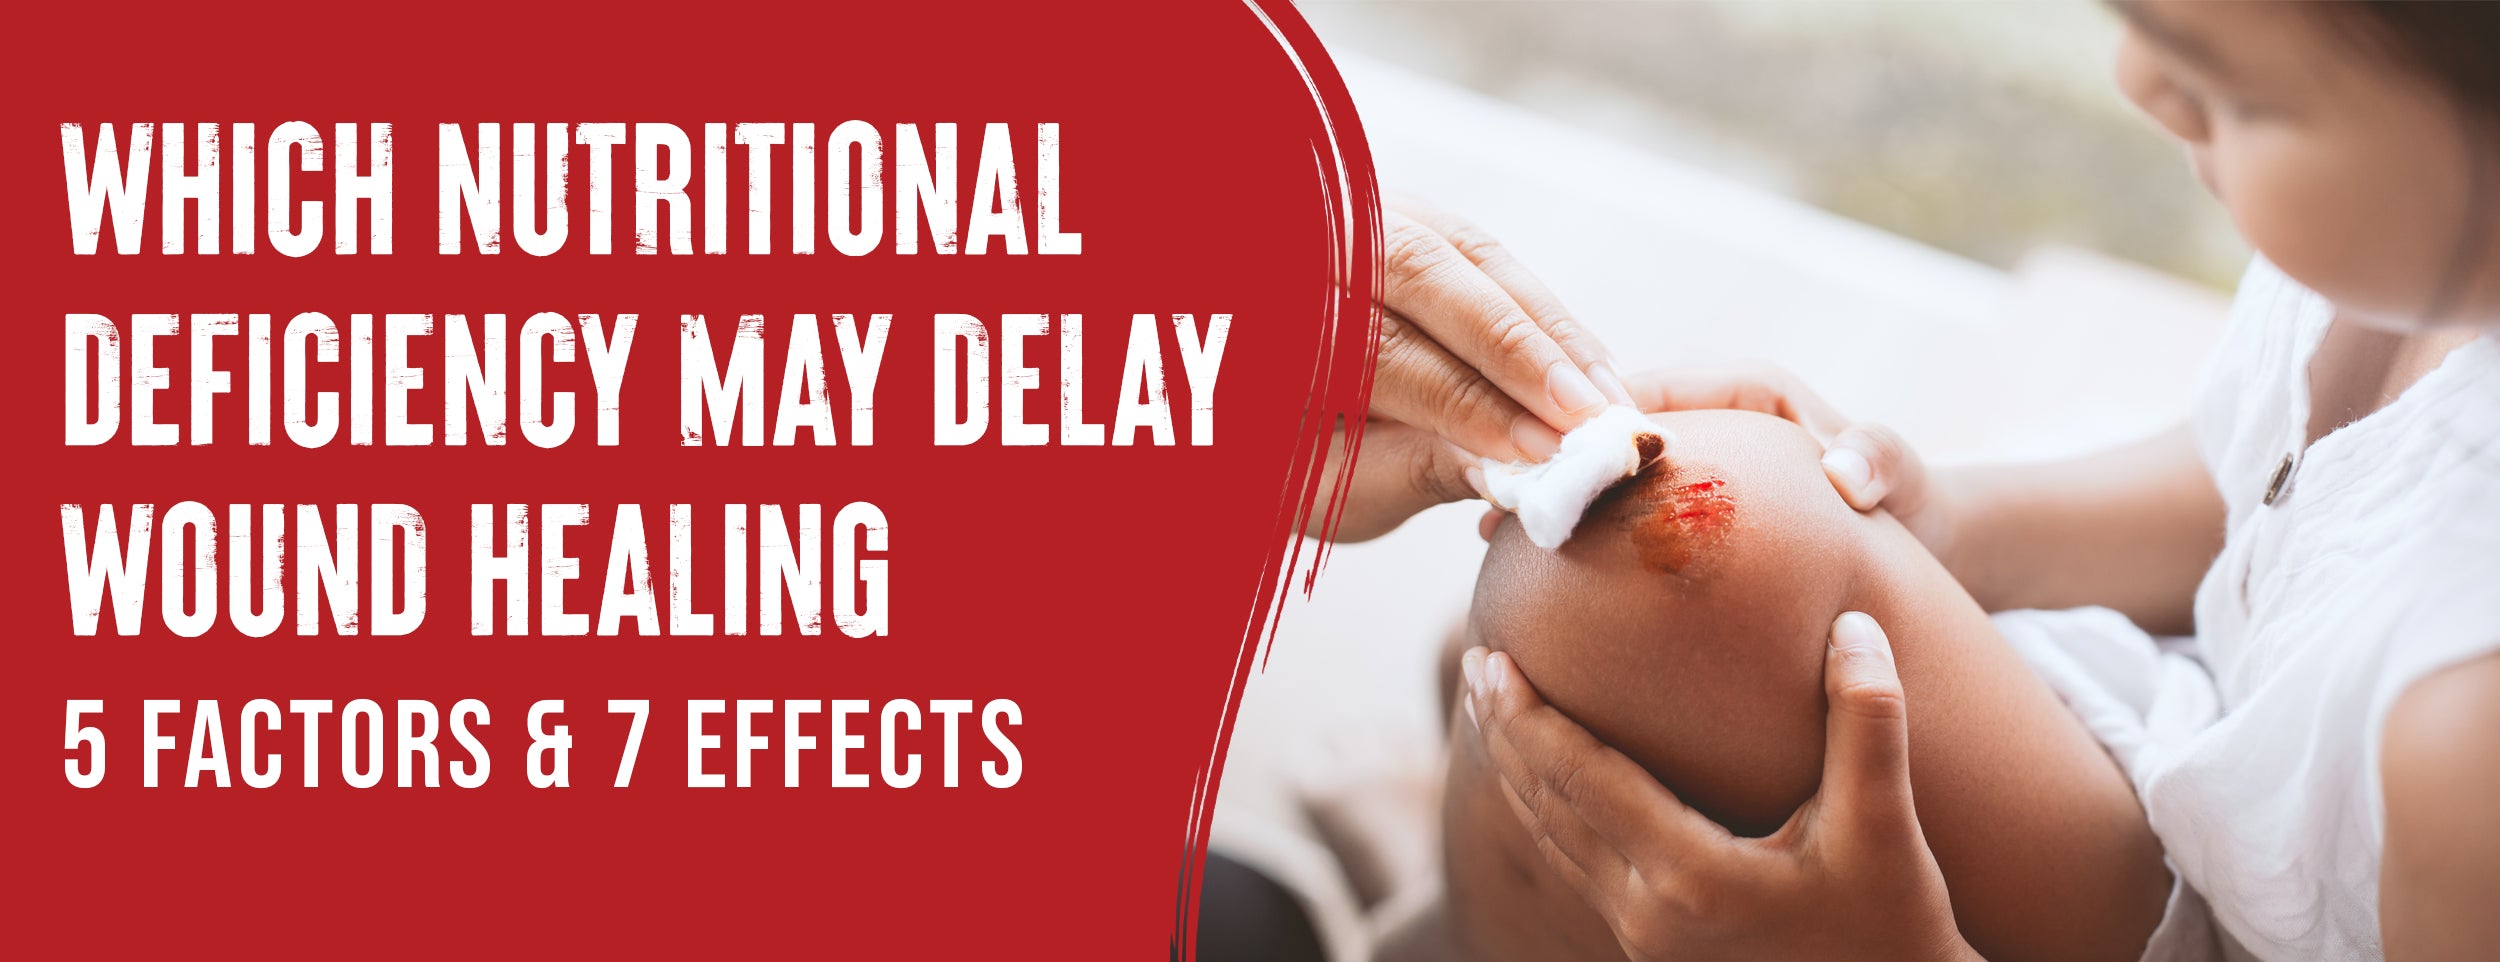 The 5 factors and 7 effects of nutritional deficiencies that delay wound healing